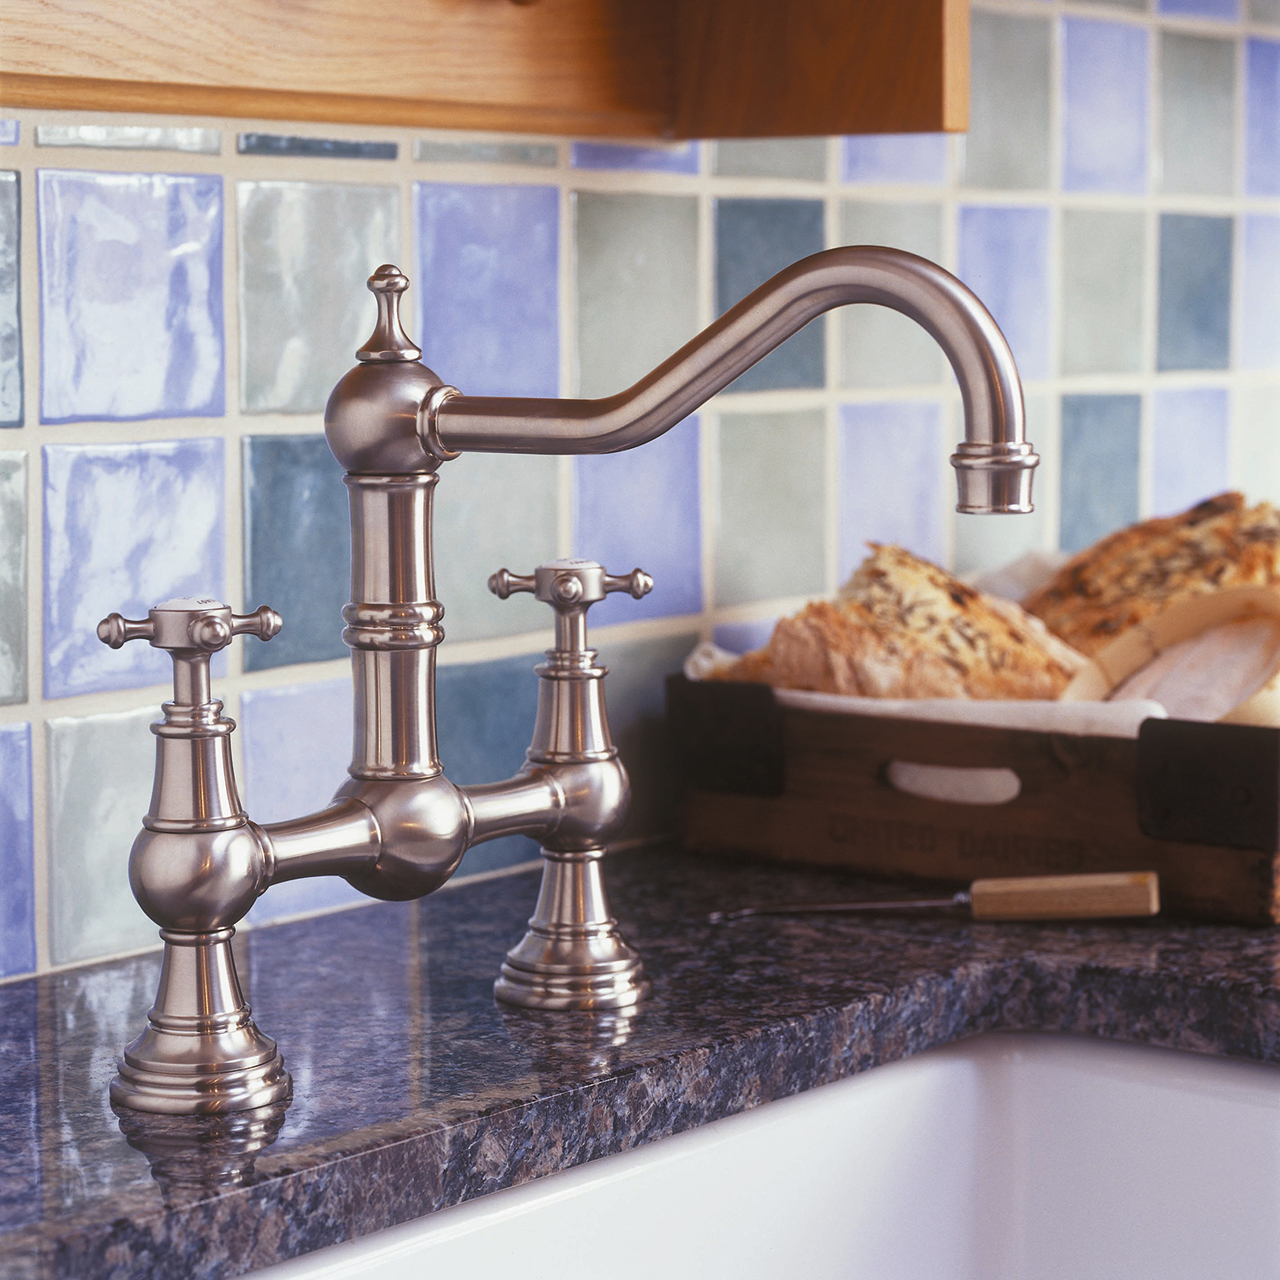 Perrin and Rowe 4750 Provence Bridge Kitchen Tap - Sinks-Taps.com